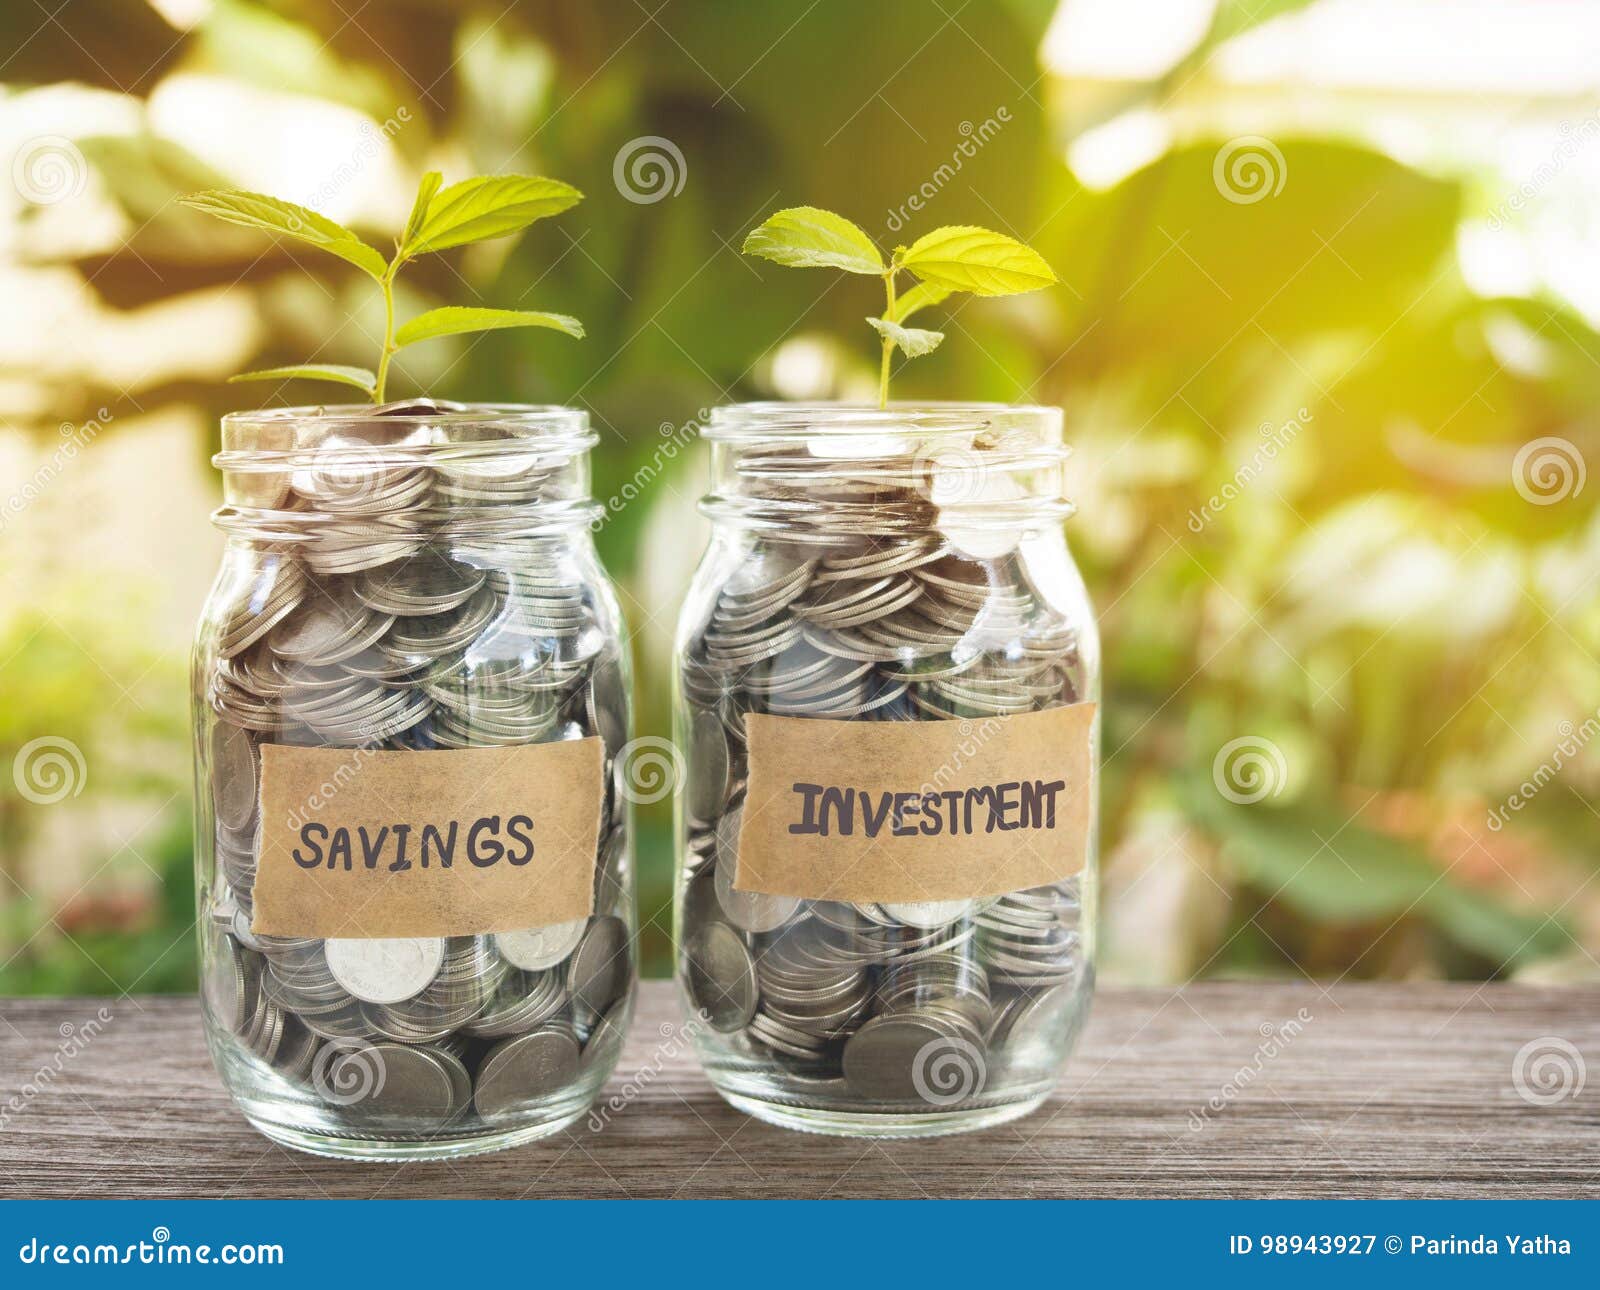 Savings and Investment, Money Growing Concept. Stock Image - Image of  investment, growth: 98943927